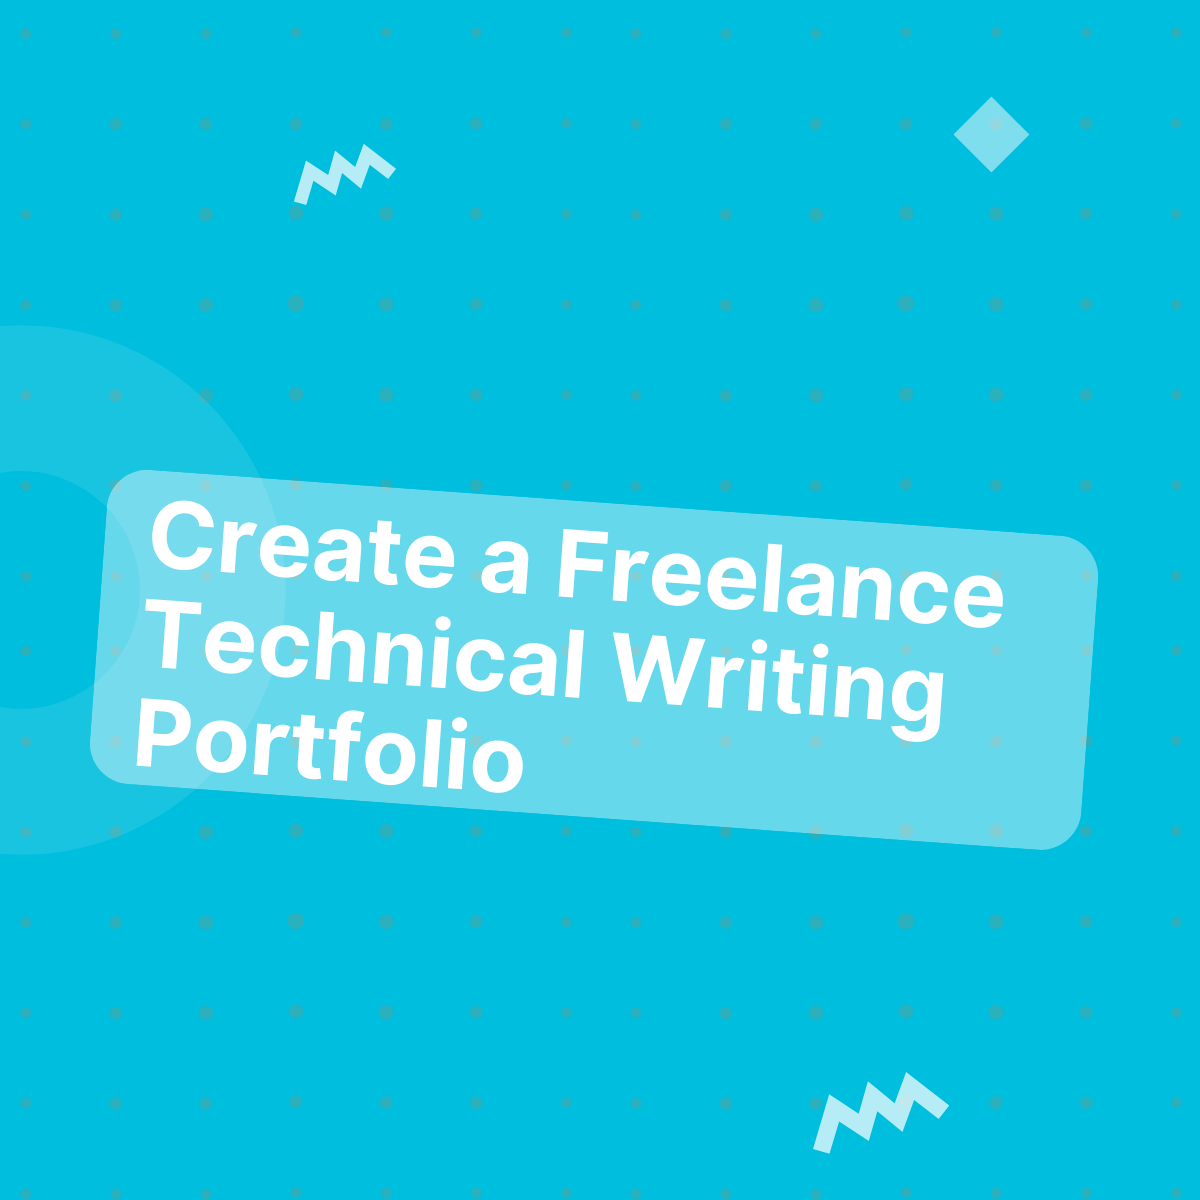 How to create a freelance technical writing portfolio from scratch